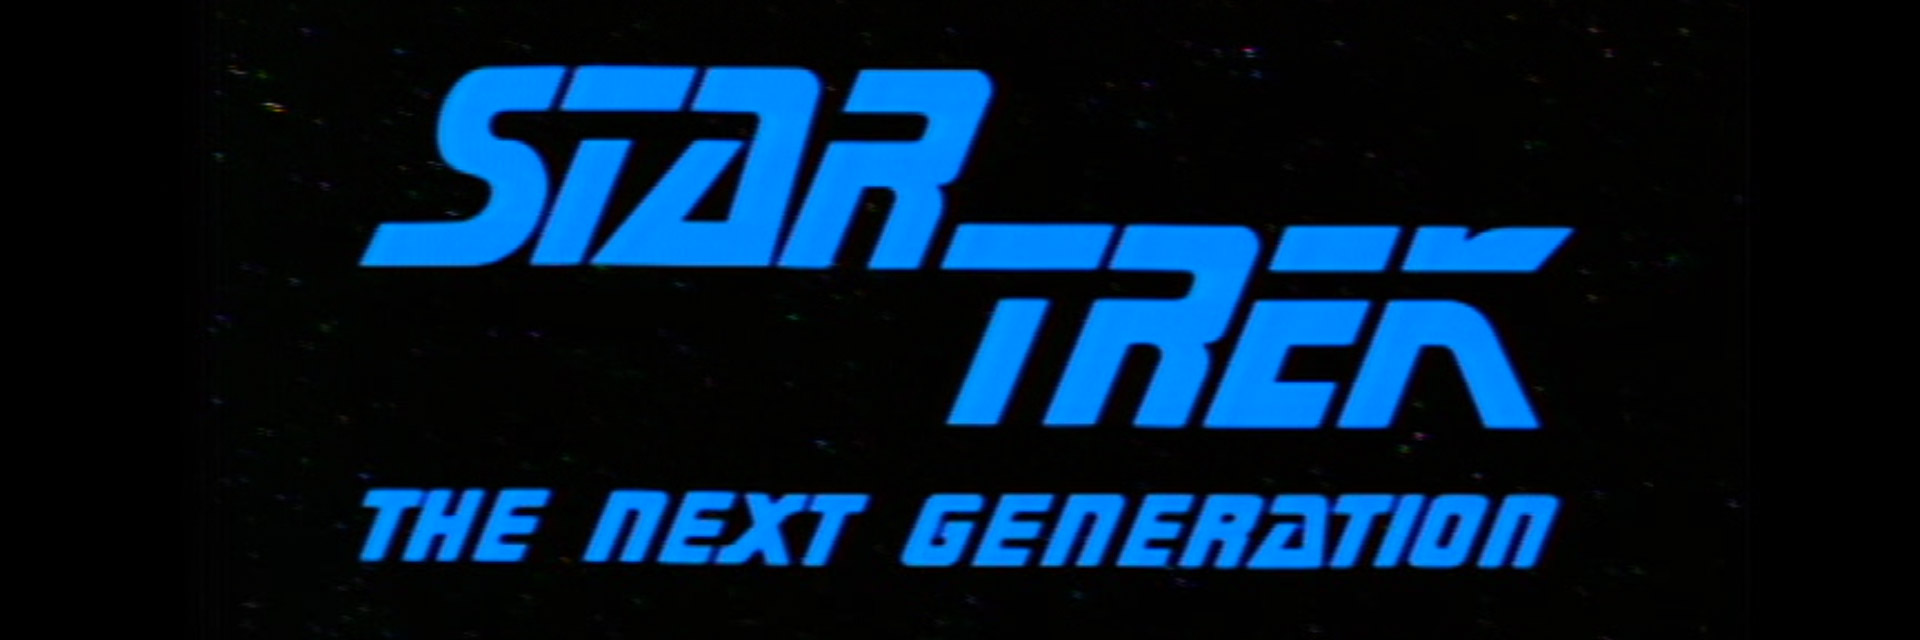 ™ & © 2016 CBS Studios Inc. – The Star Trek: The Next Generation logo as seen in the title sequences of the Star Trek: The Next Generation television series.